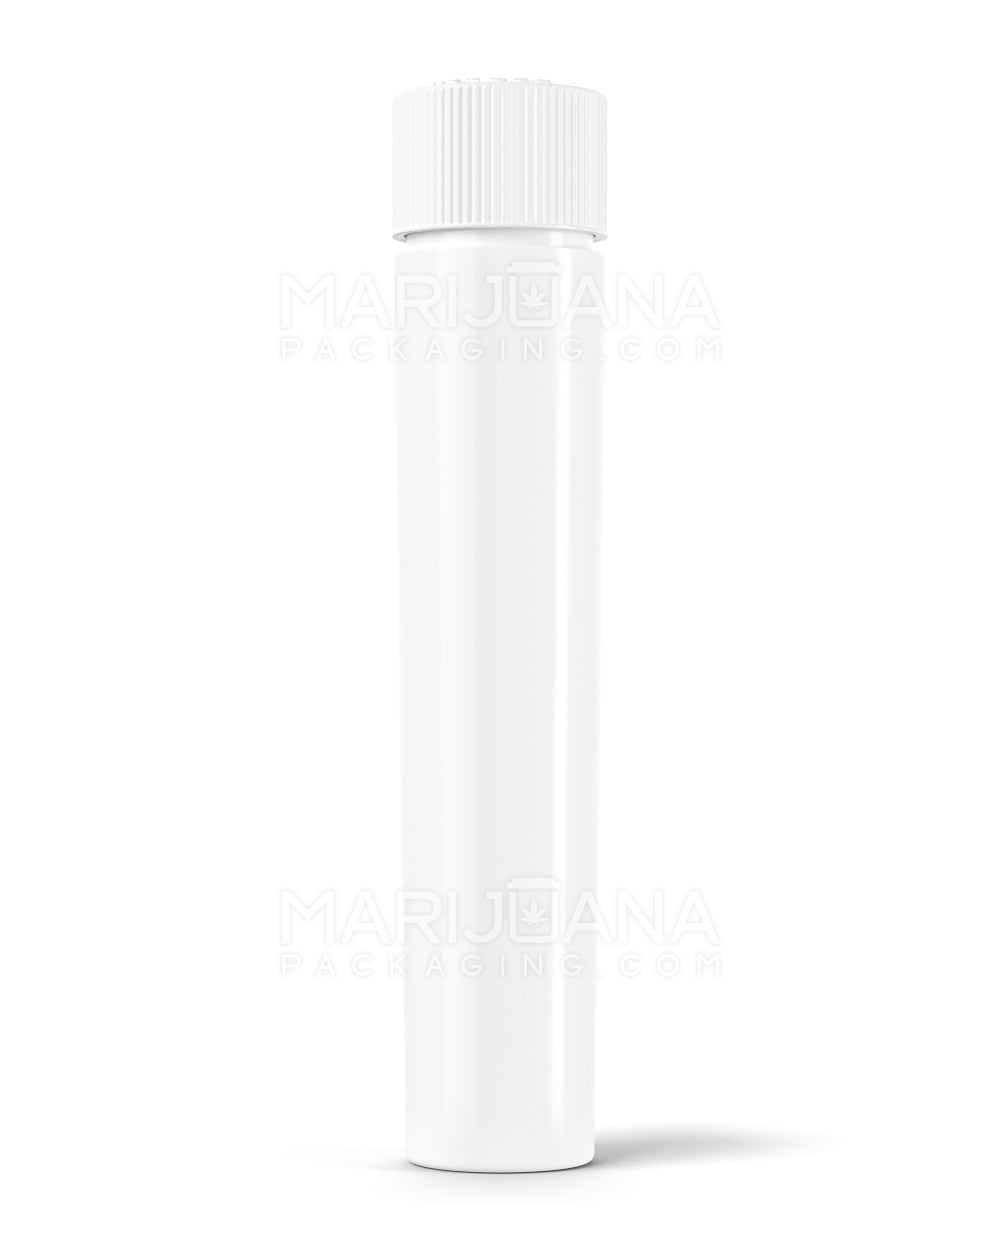 Child Resistant | Push Down & Turn Vape Cartridge Container | 72mm - White Plastic - 1650 Count - 1